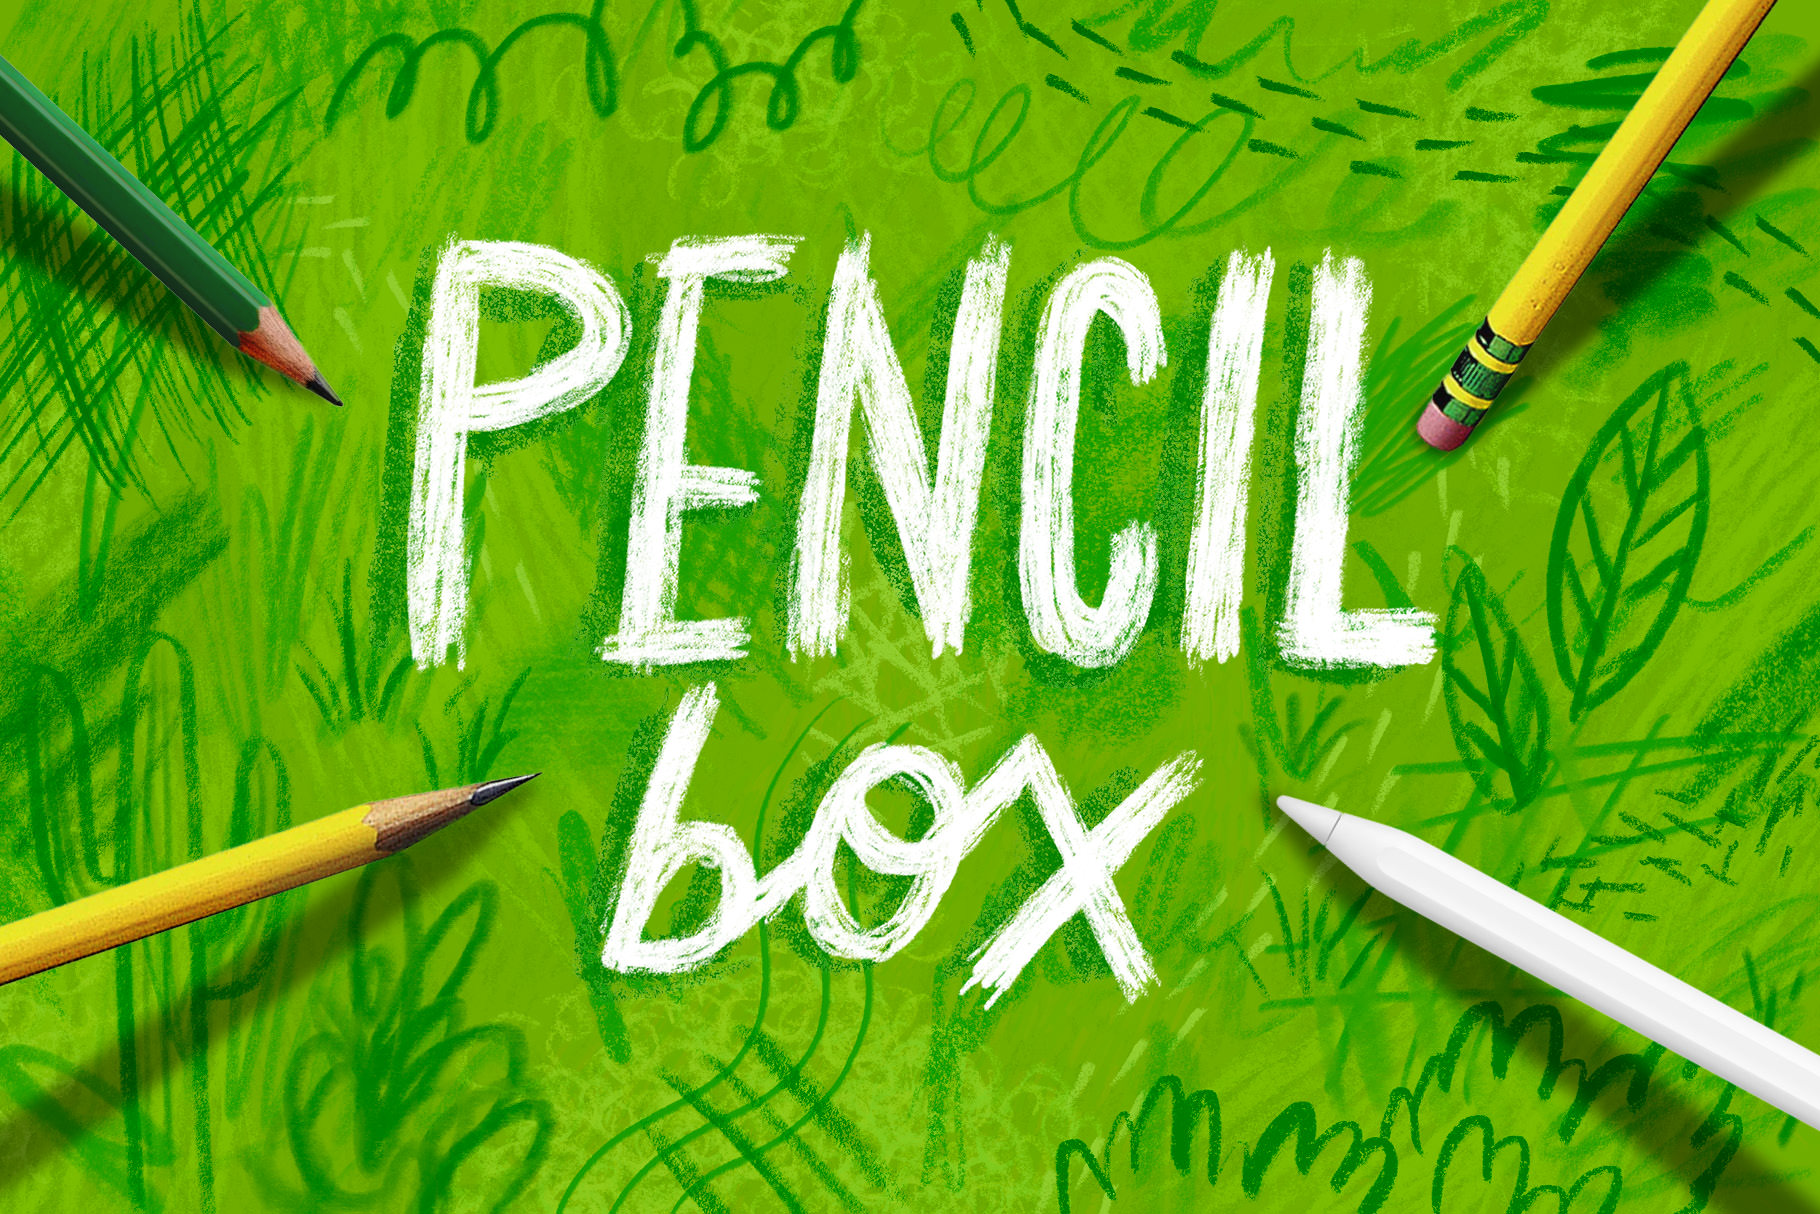 Pencil Box Pencil brushes for Procreate by Bardot Brush 2